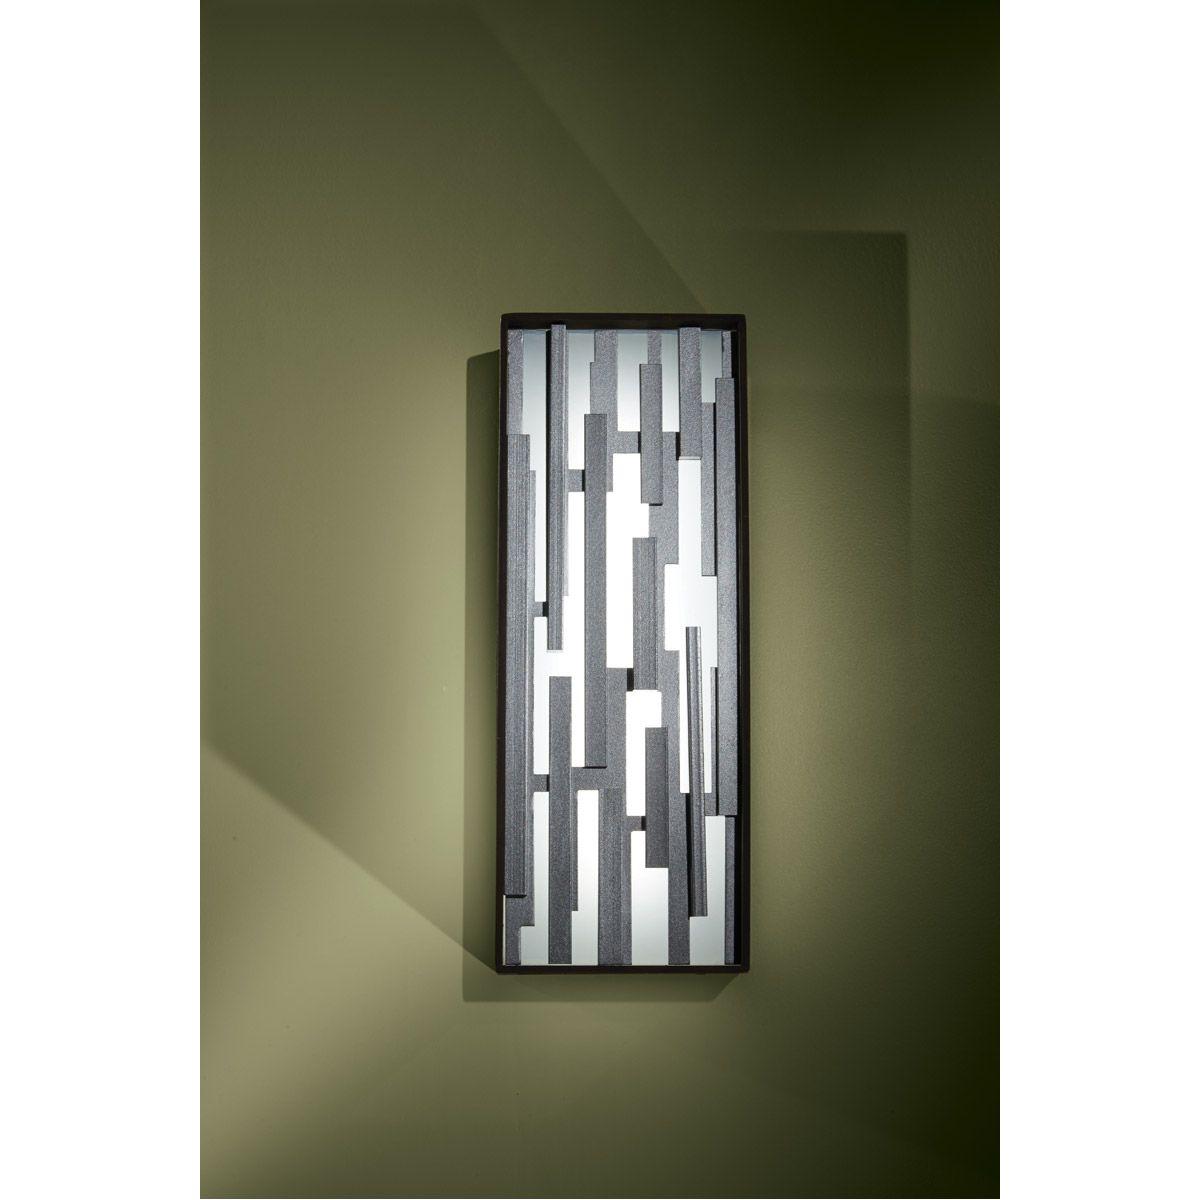 Bars 17 In. LED Outdoor Wall Sconce Bronze & Silver Finish